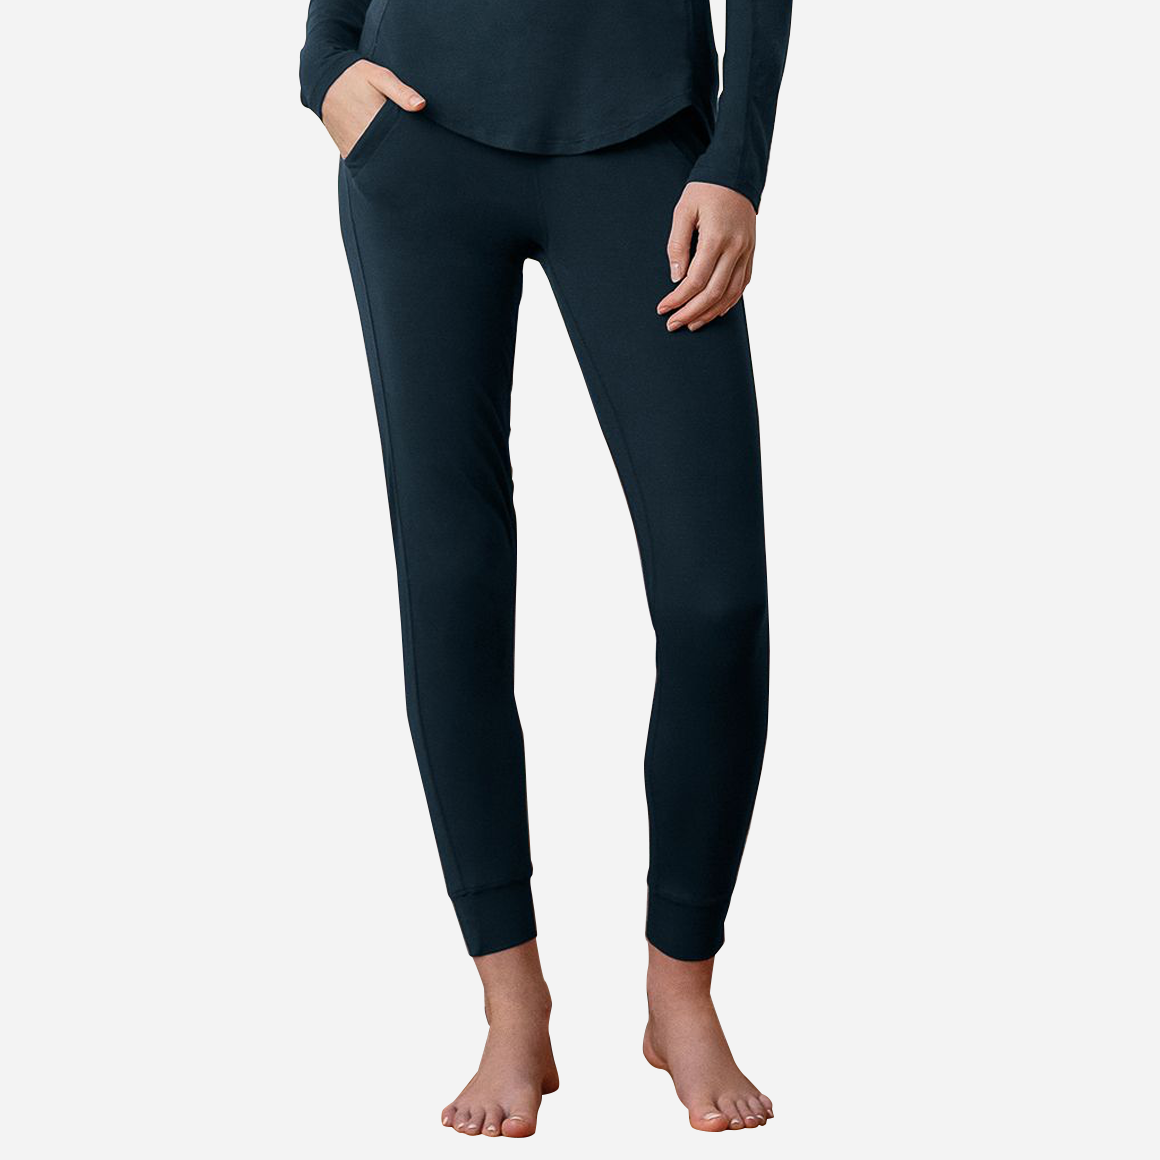 Dark Blue lounge and sleep jogger pant on front-facing female model with hand in front pocket.